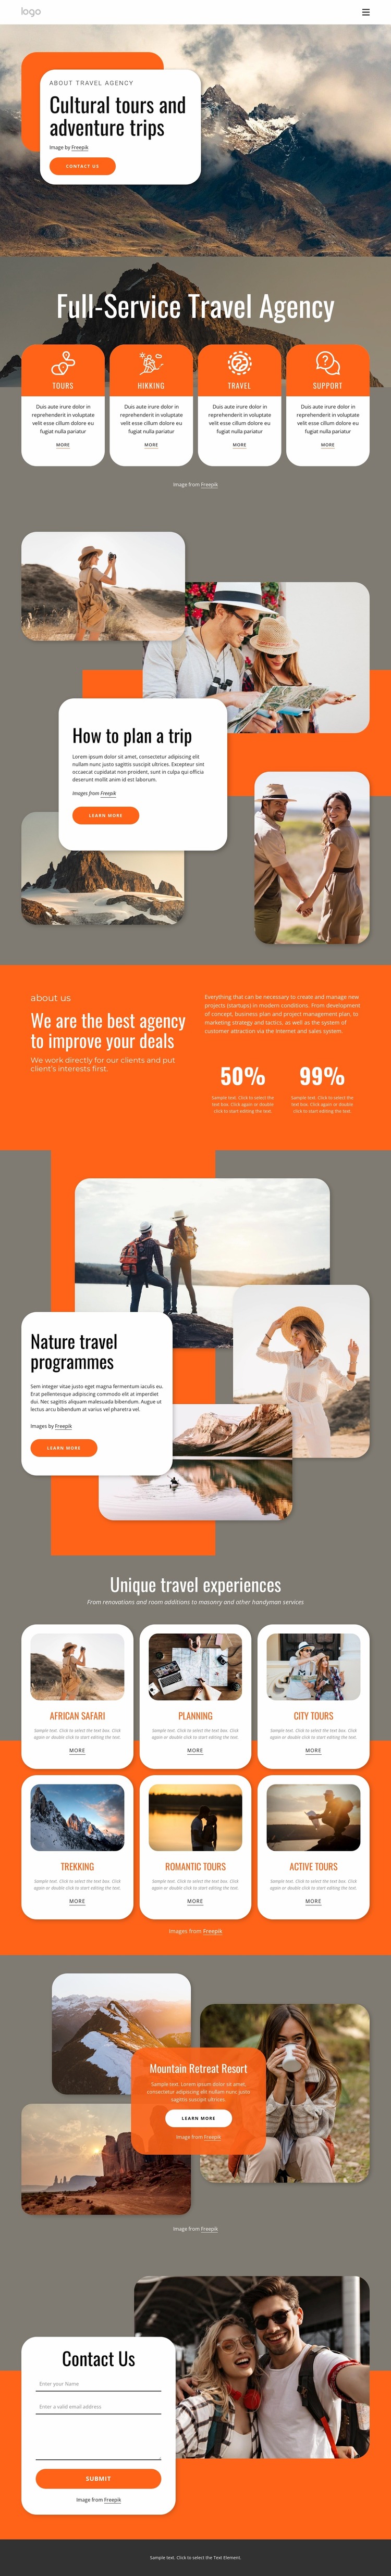 Group travel for all ages WordPress Website Builder